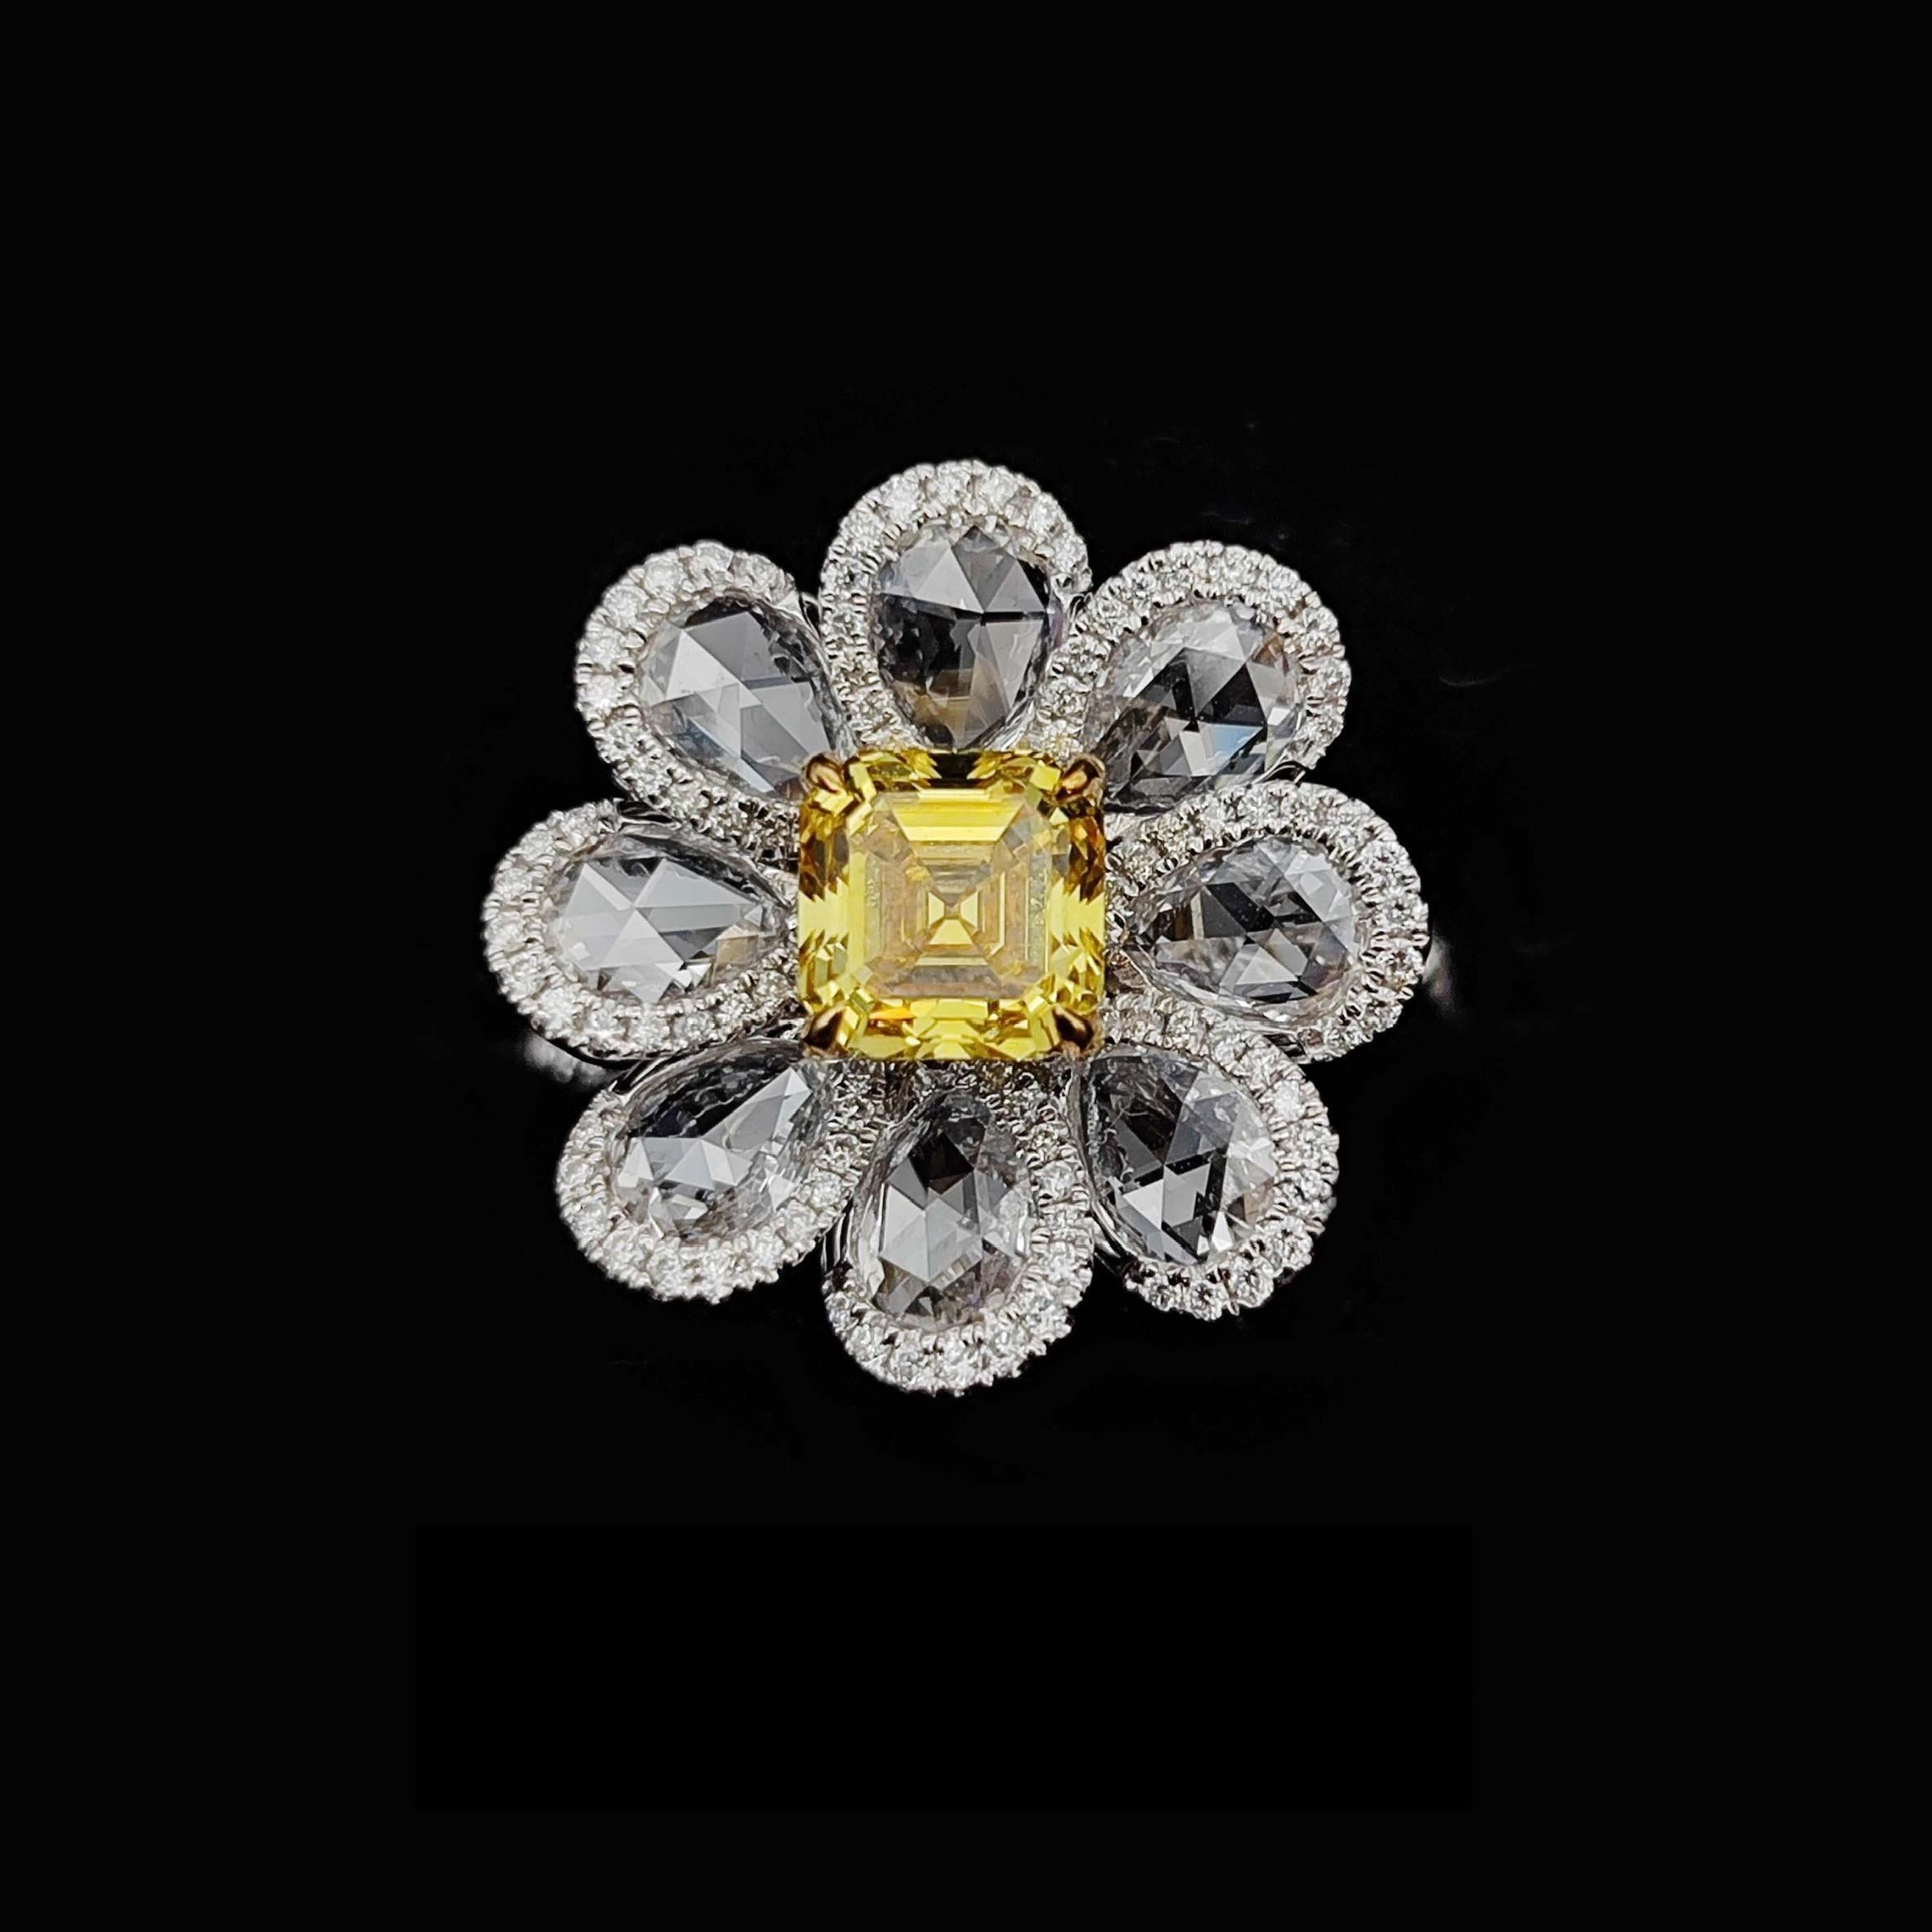 Emerald Cut 1.04 Carat Fancy Vivid Yellow Diamond Flower Cocktail Ring GIA Report, 18k Gold For Sale